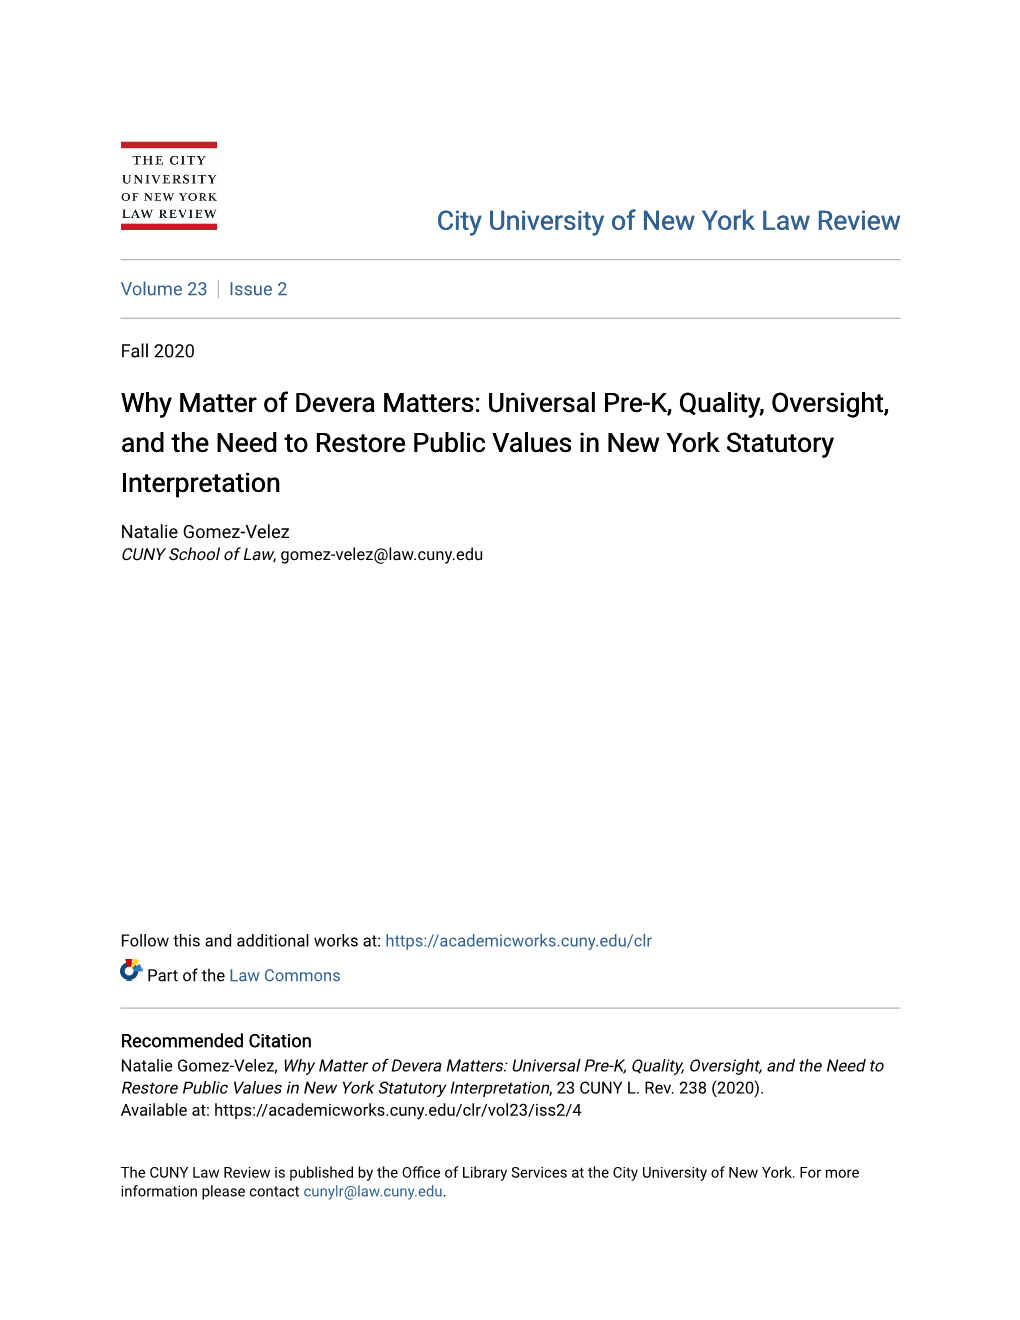 Universal Pre-K, Quality, Oversight, and the Need to Restore Public Values in New York Statutory Interpretation